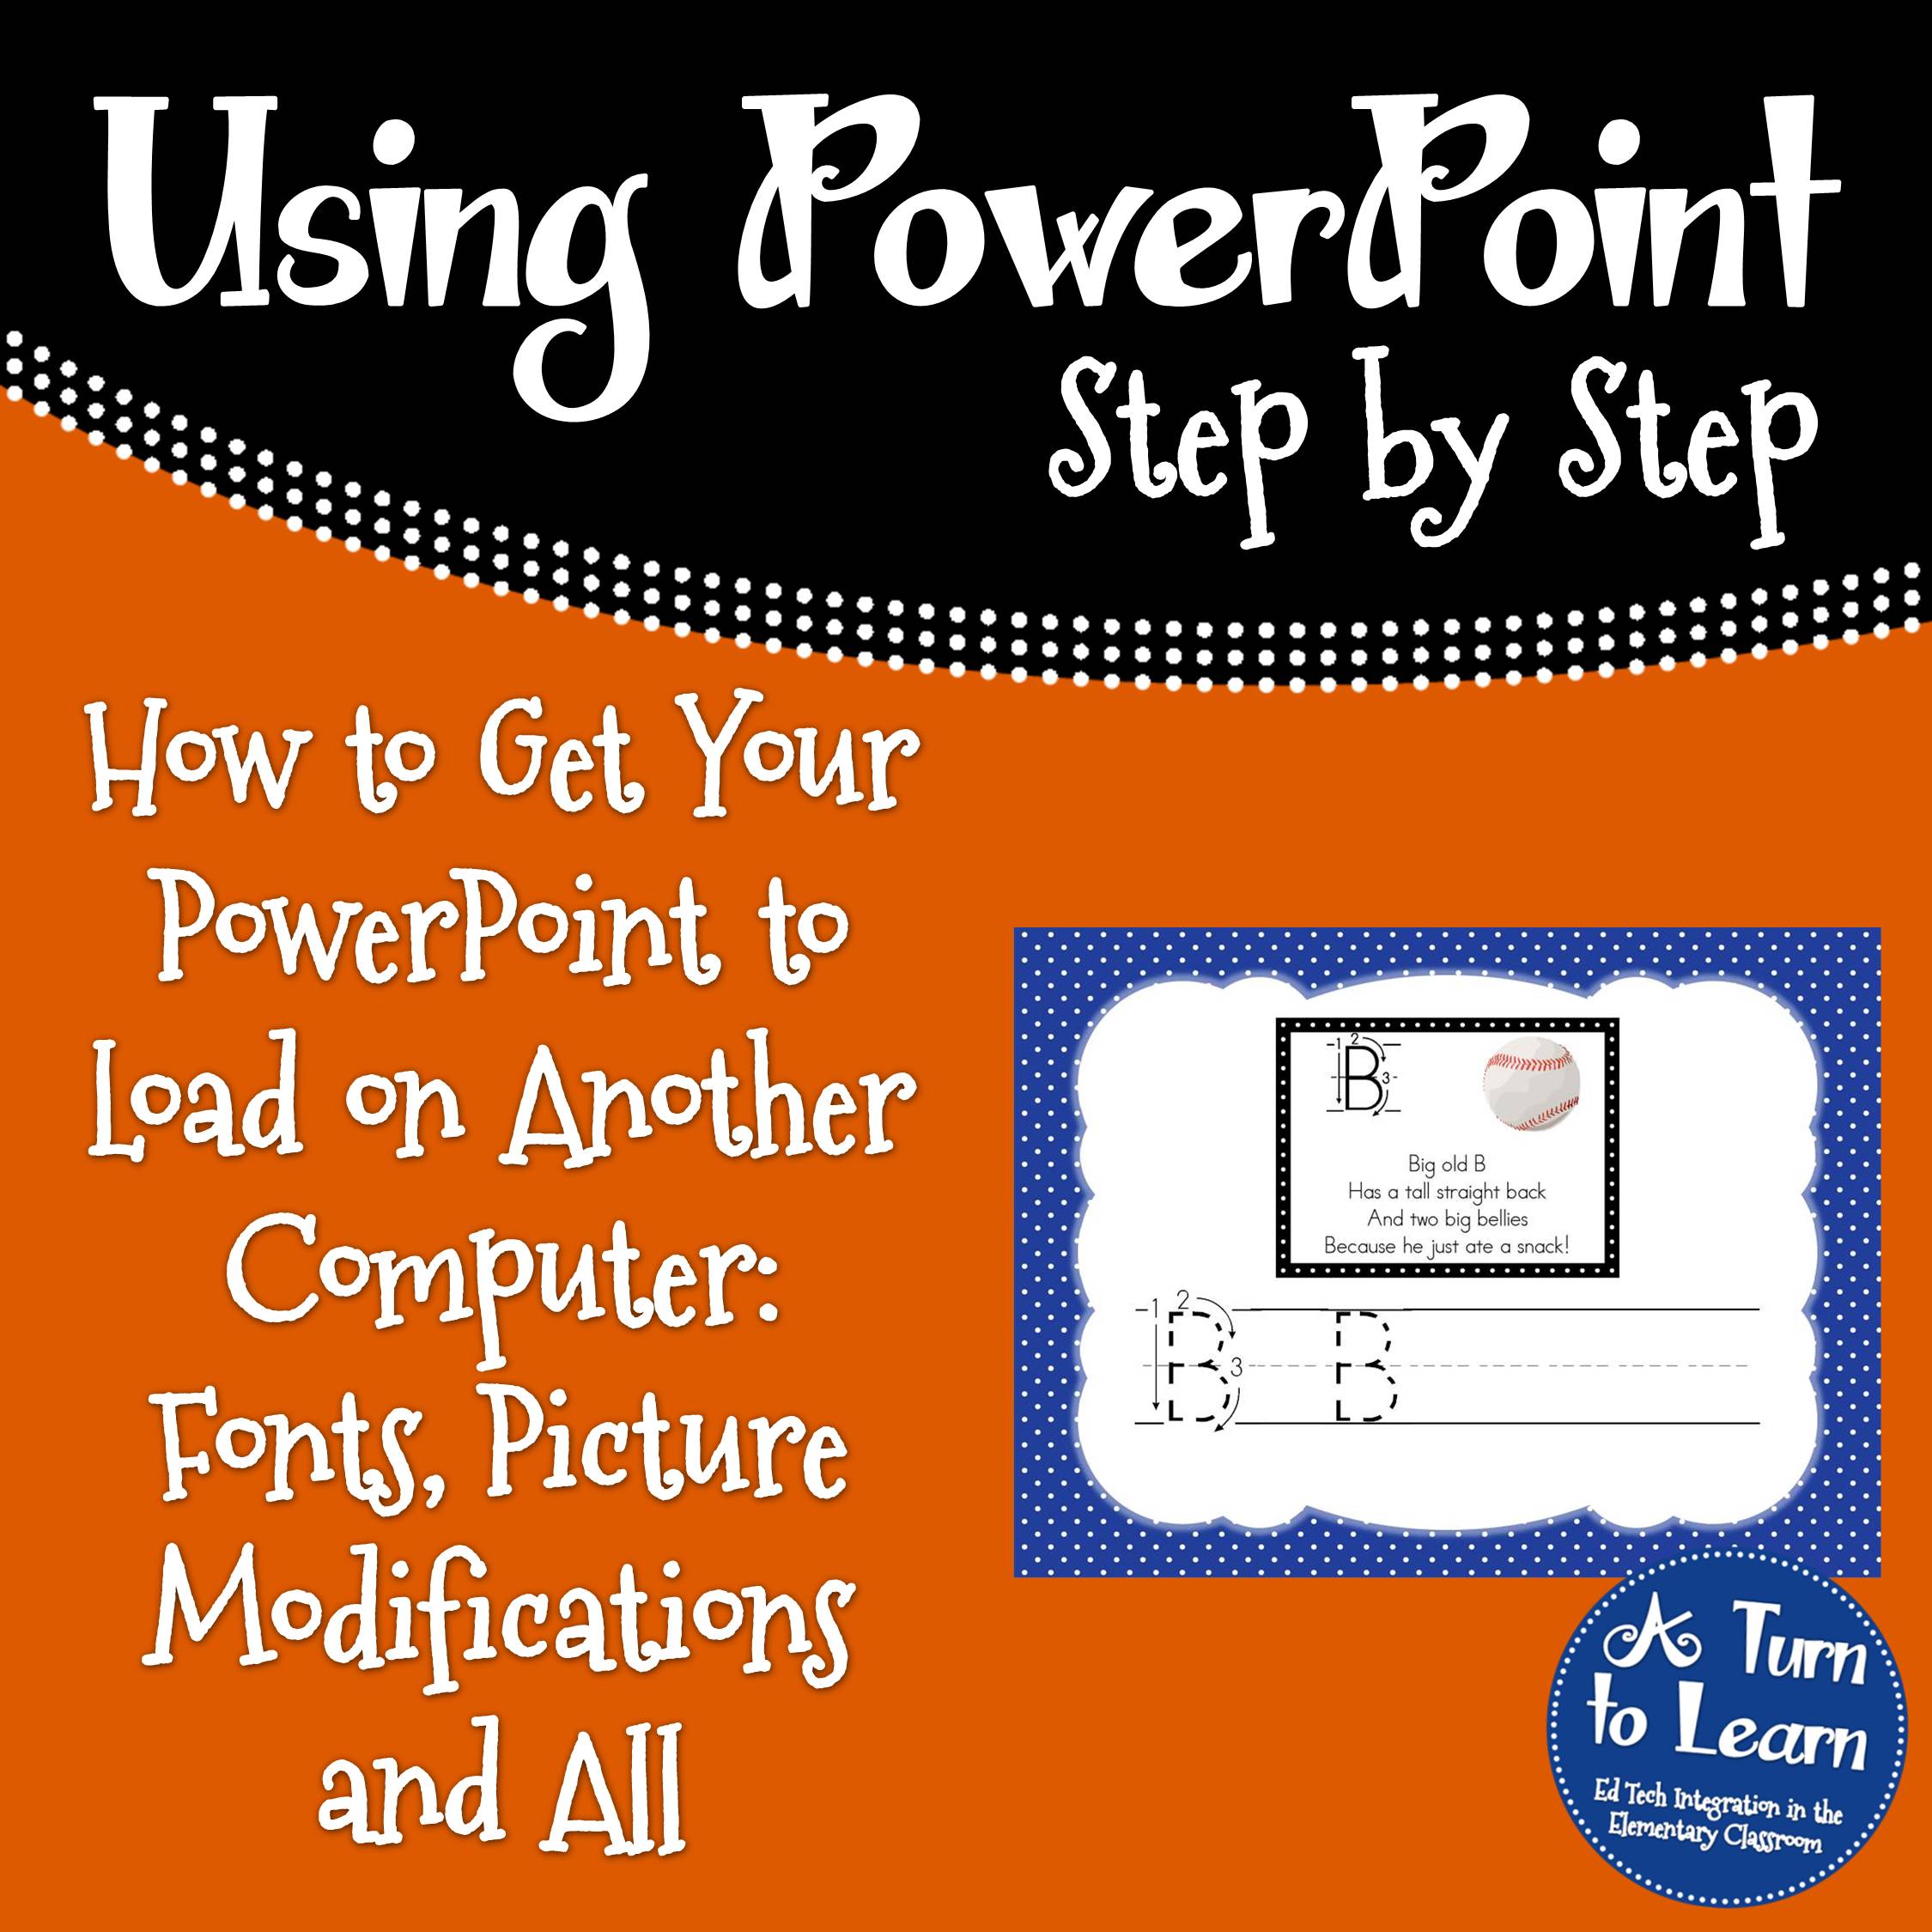 How to Get Your PowerPoint to Load on Another Computer... Fonts, Picture Modifications, and All!